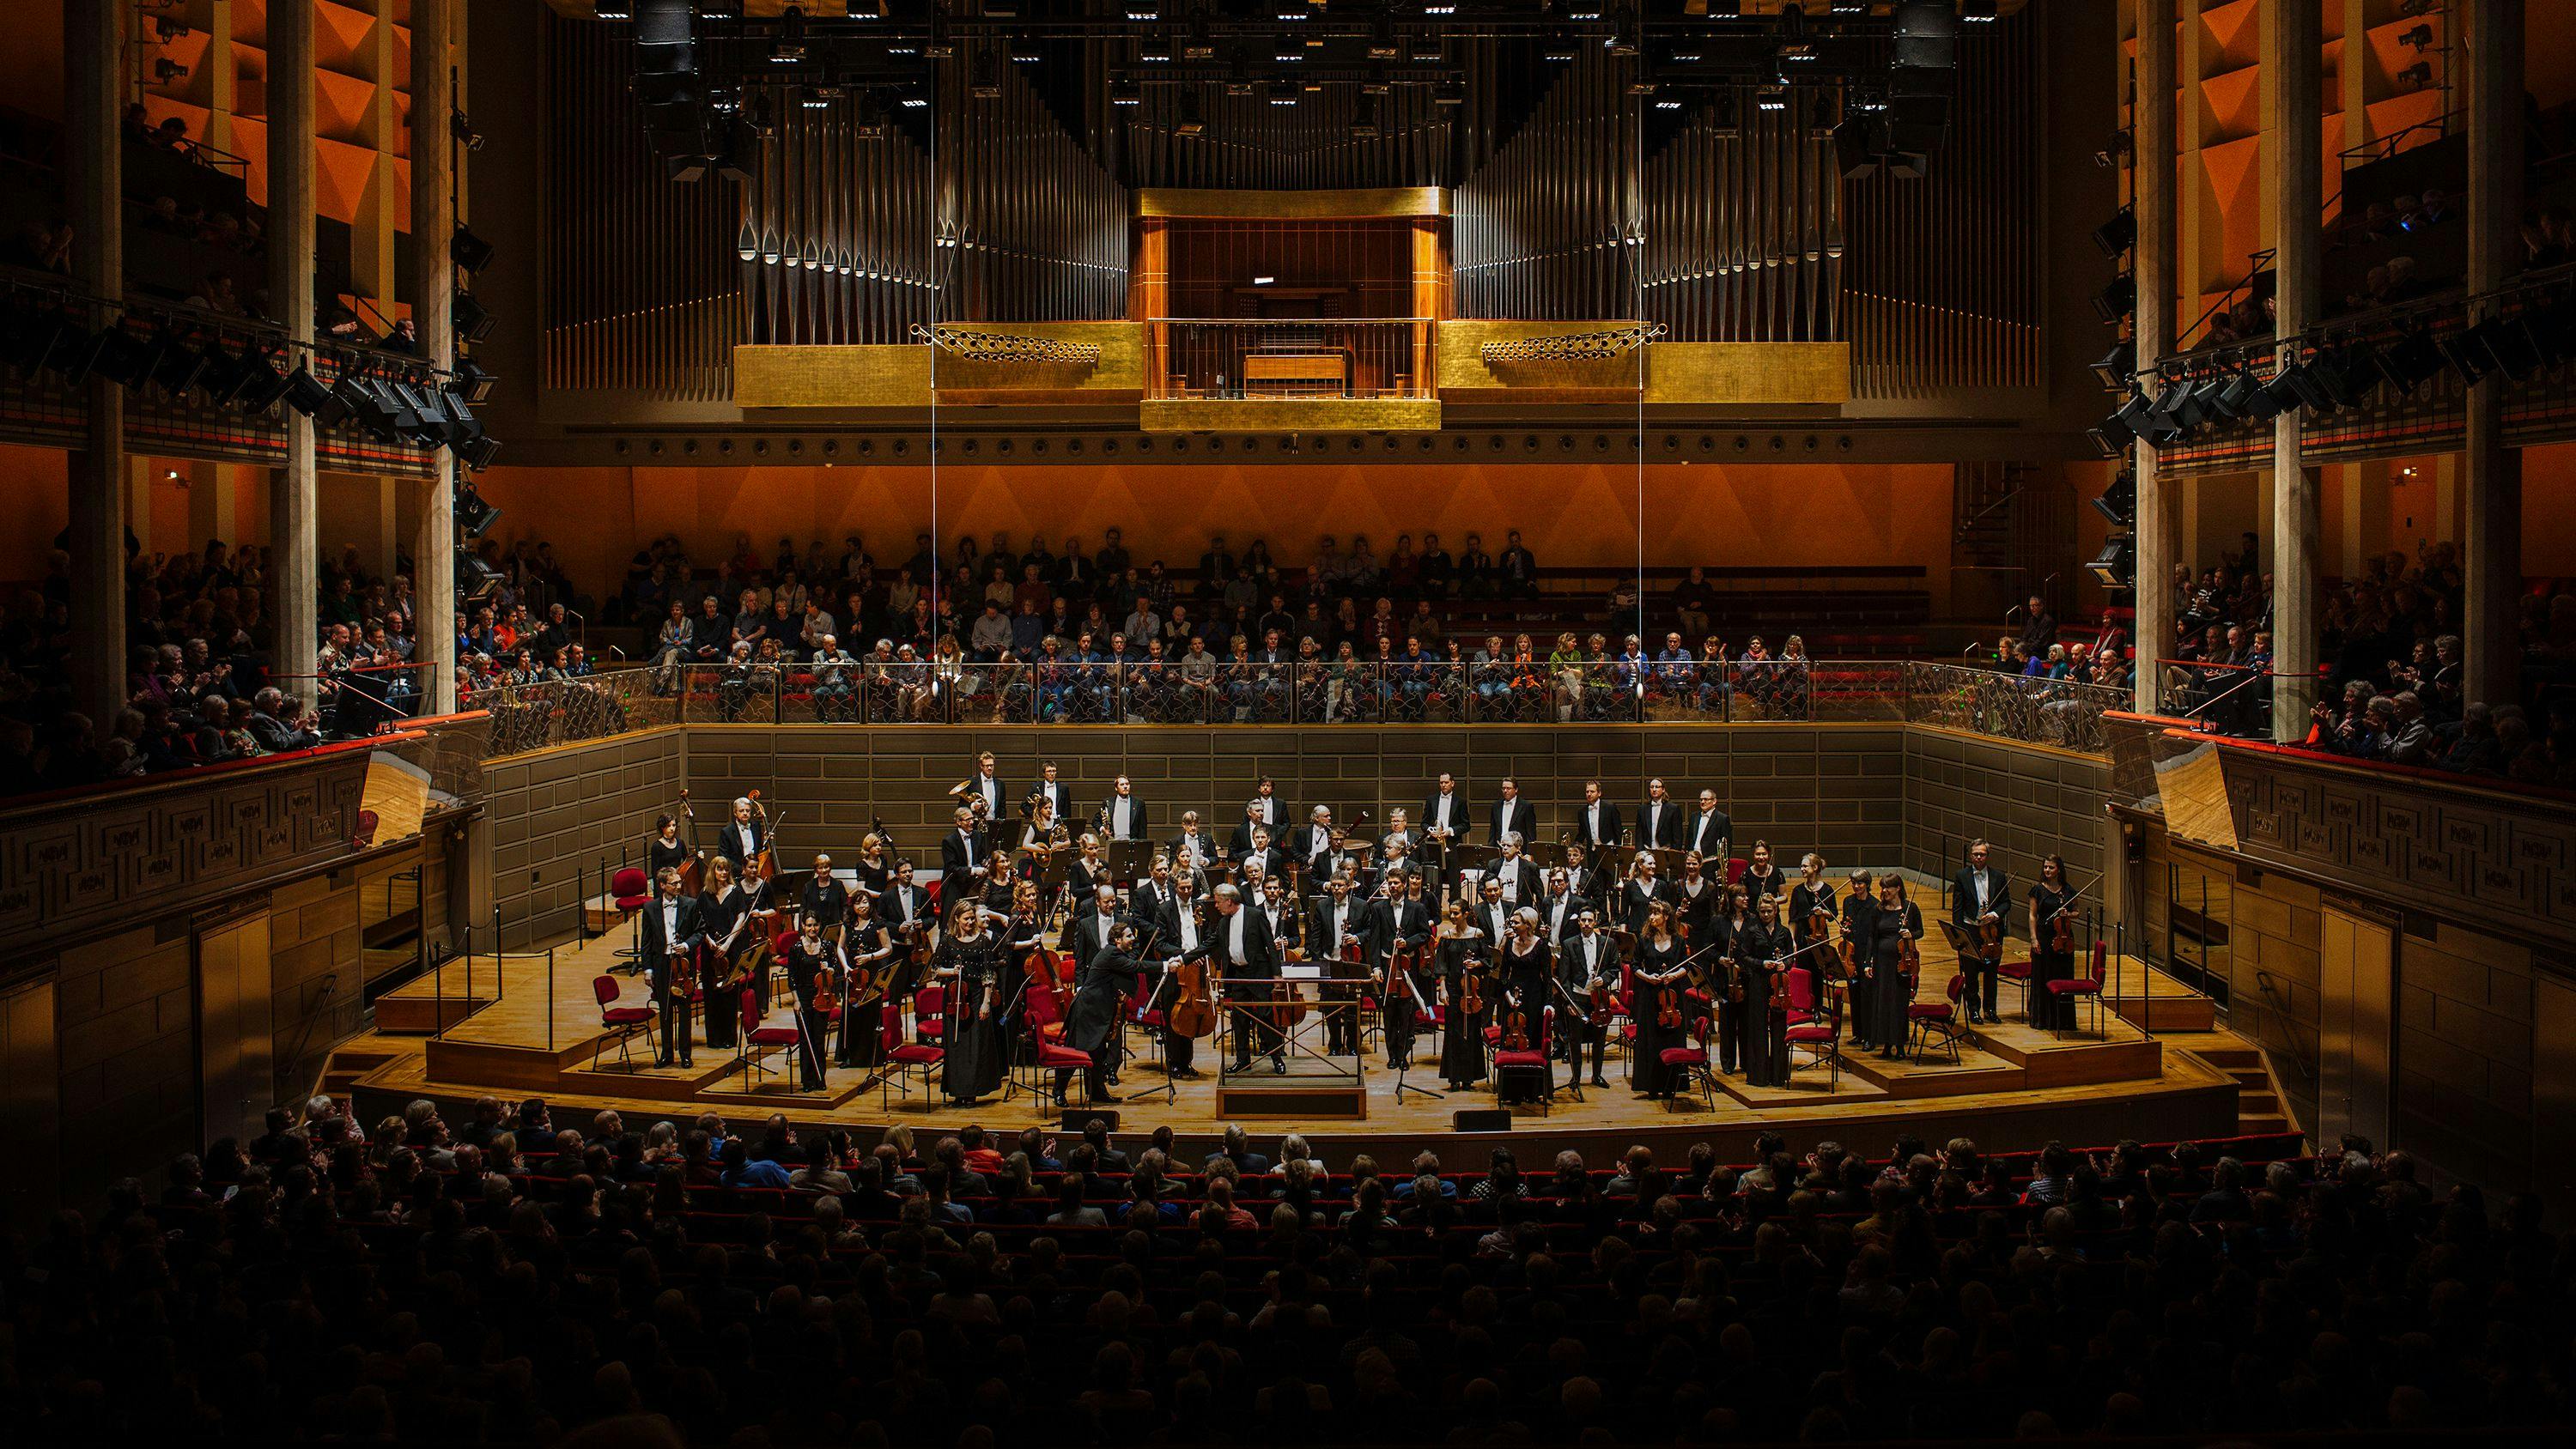 Interior view of the Konserthuset (Concert Hall) in Stockholm, Sweden, showcasing the Royal Stockholm Philharmonic Orchestra on stage receiving applause from a full audience.